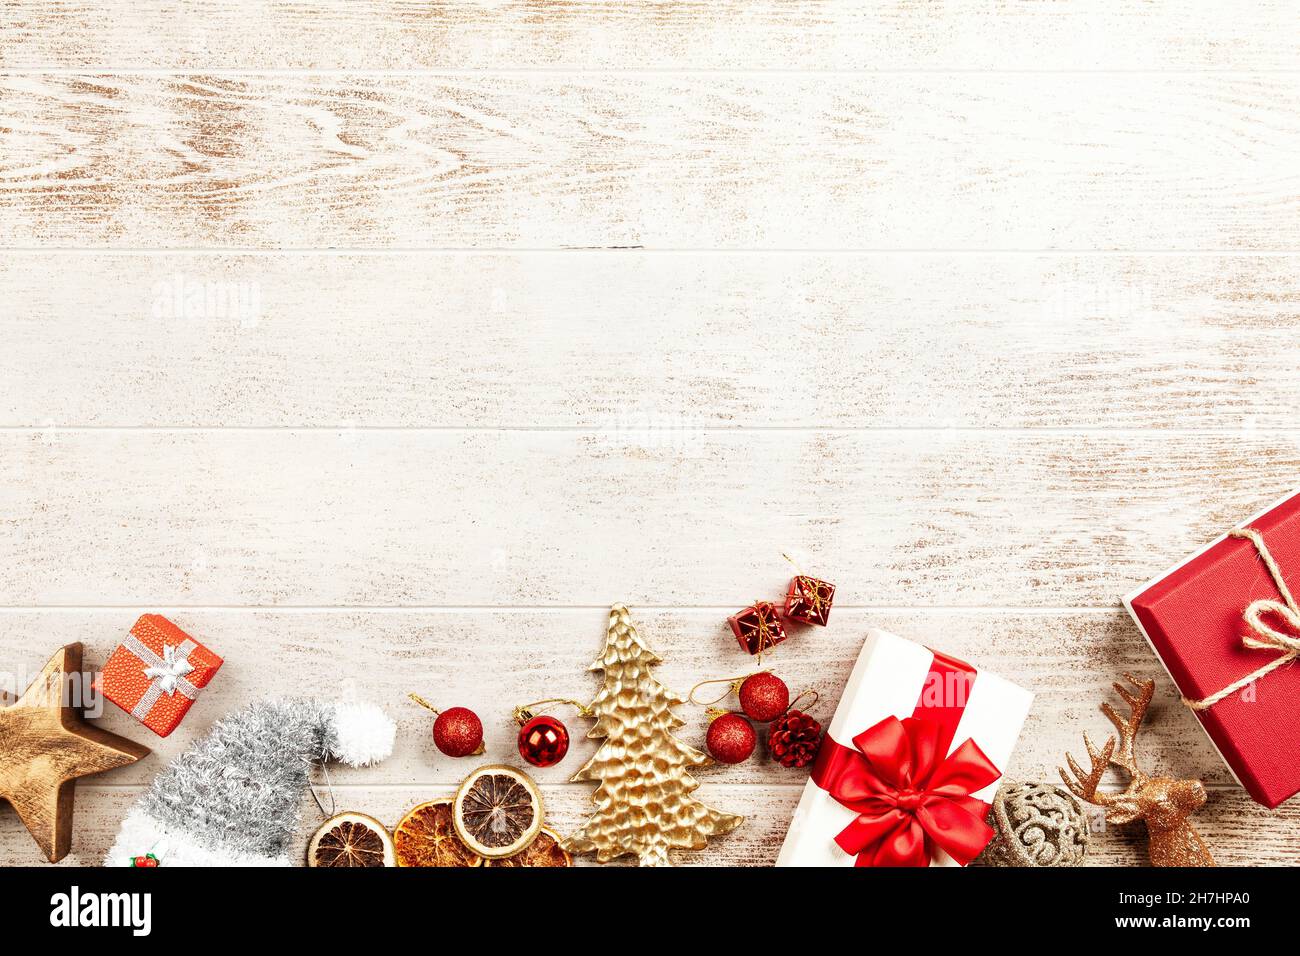 Christmas background with gift boxes on wooden table Stock Photo